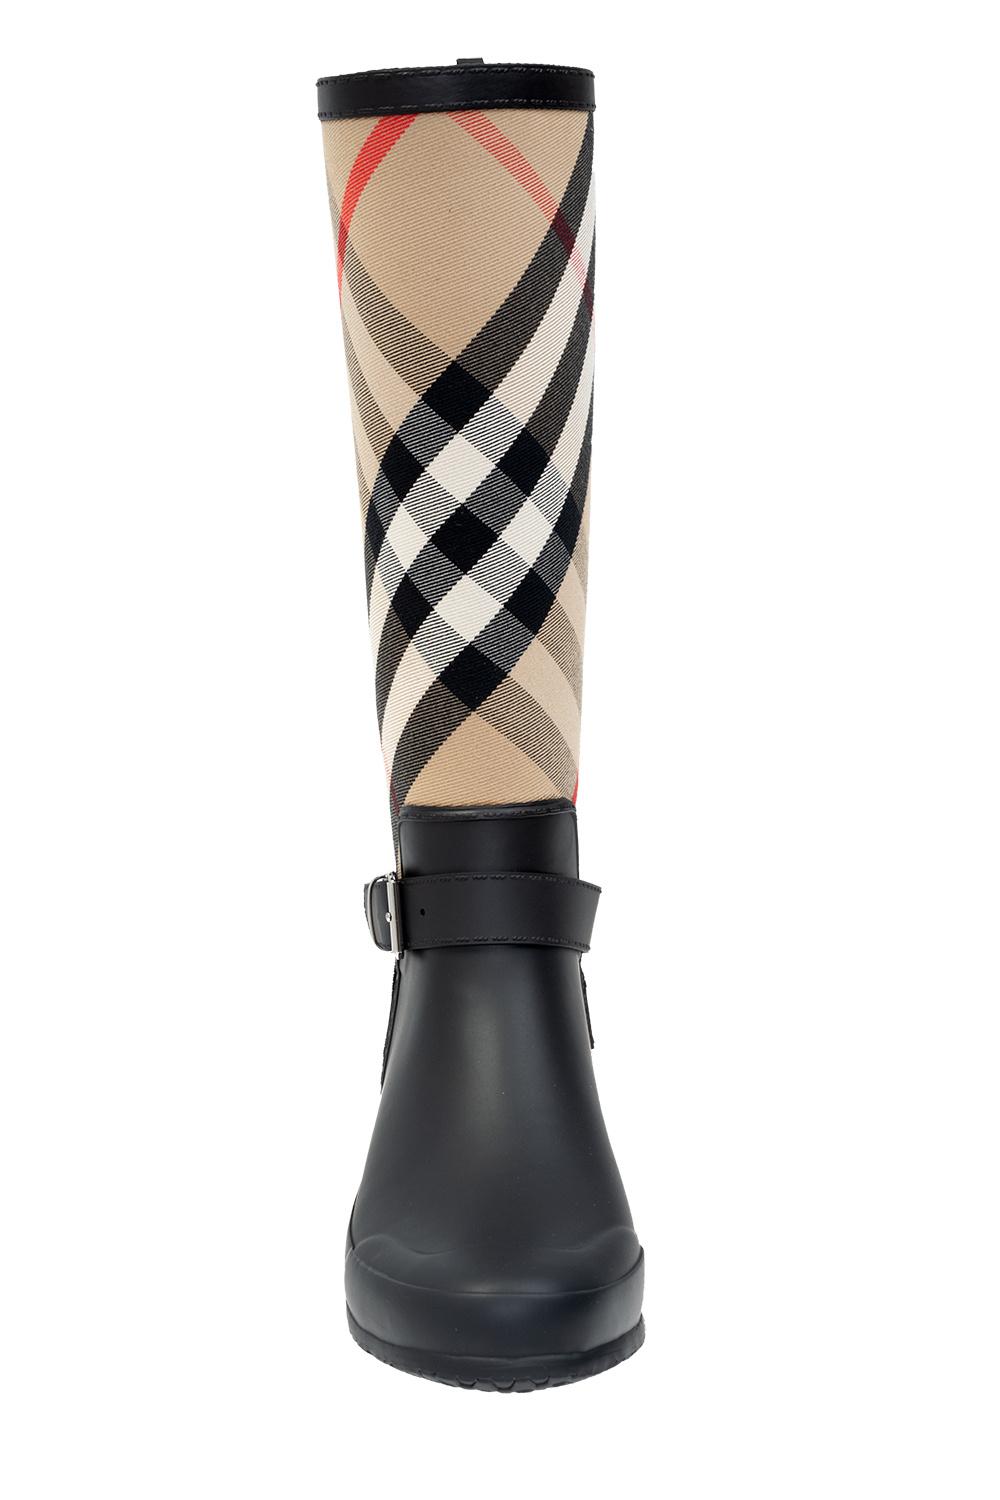 Burberry 'house Check' Rain Boots in Beige (Natural) | Lyst UK